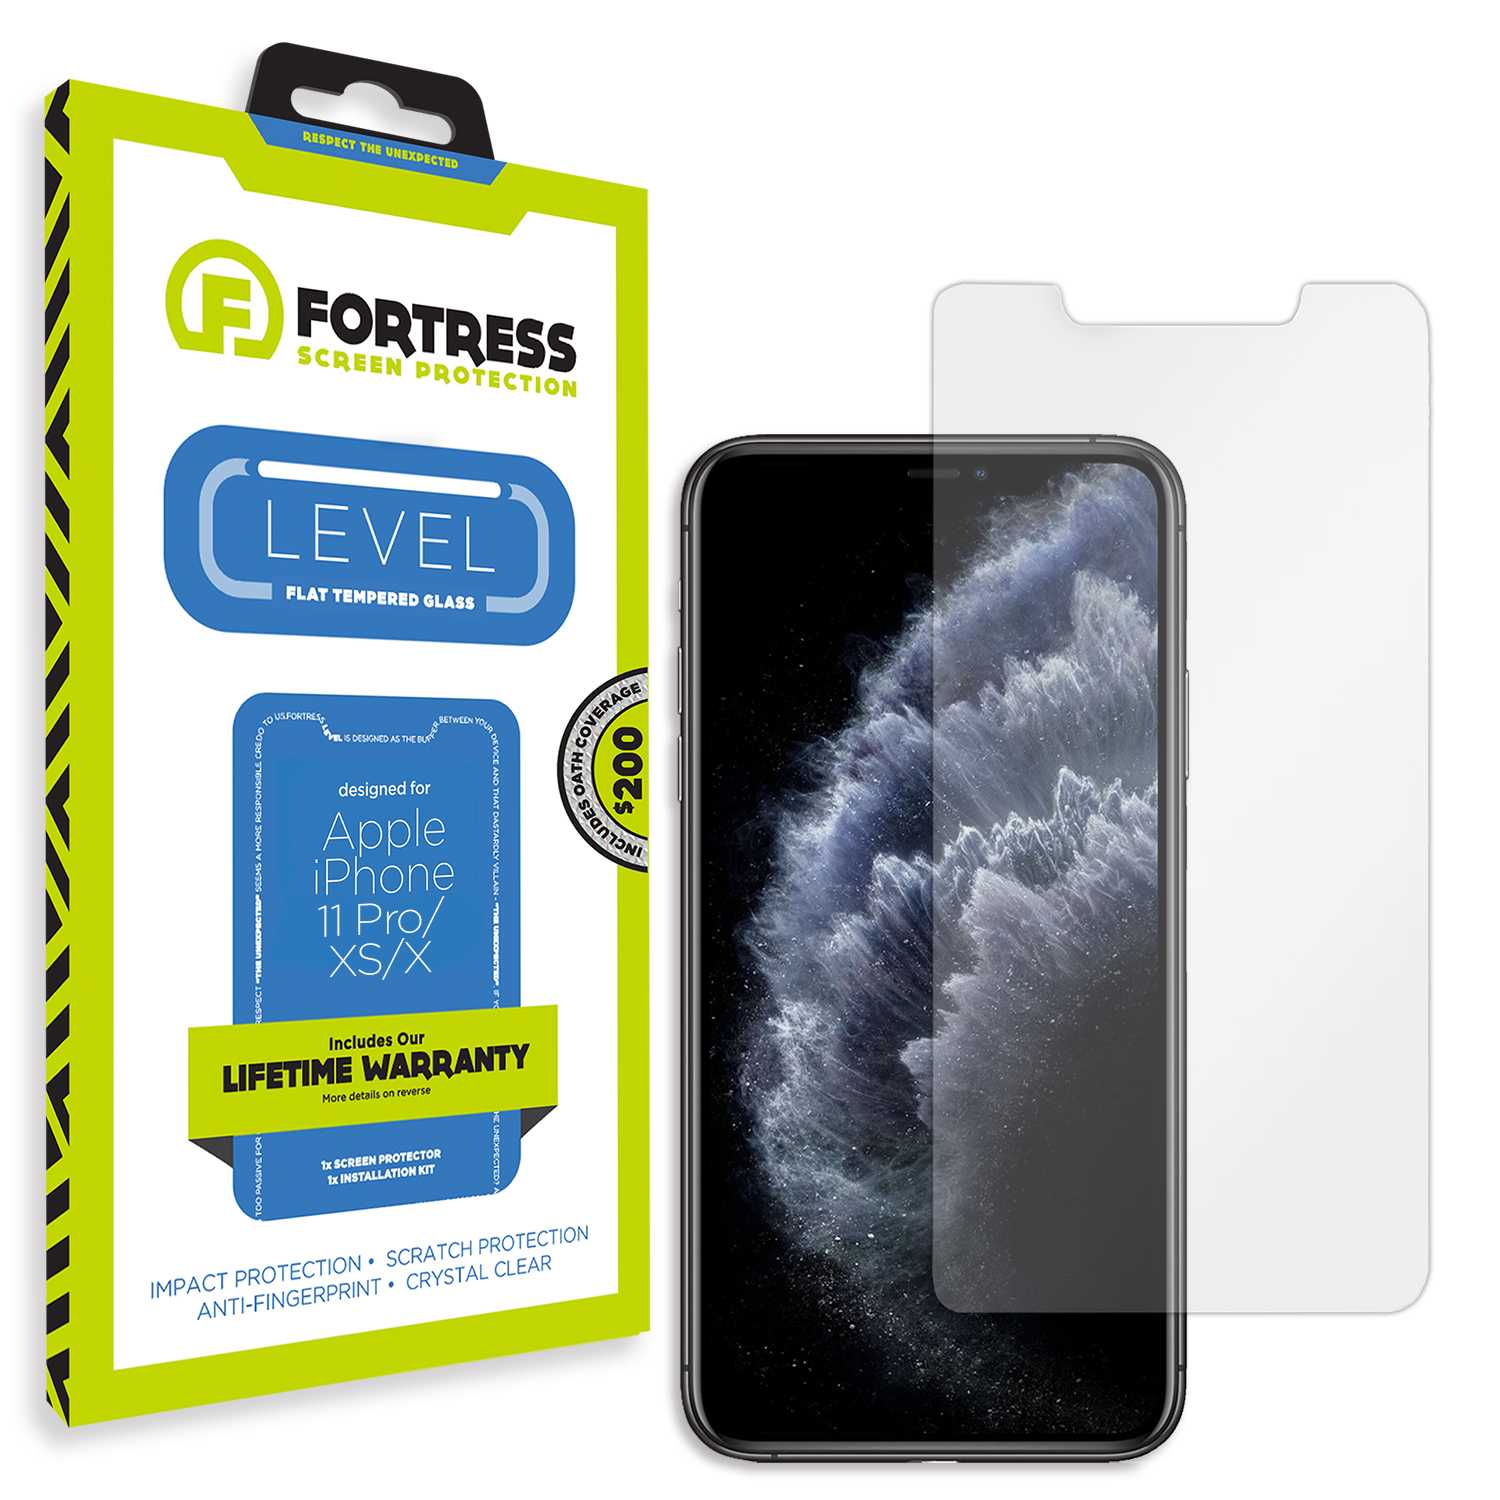 Fortress iPhone 11 Pro Screen Protector $200Coverage Scooch Screen Protector